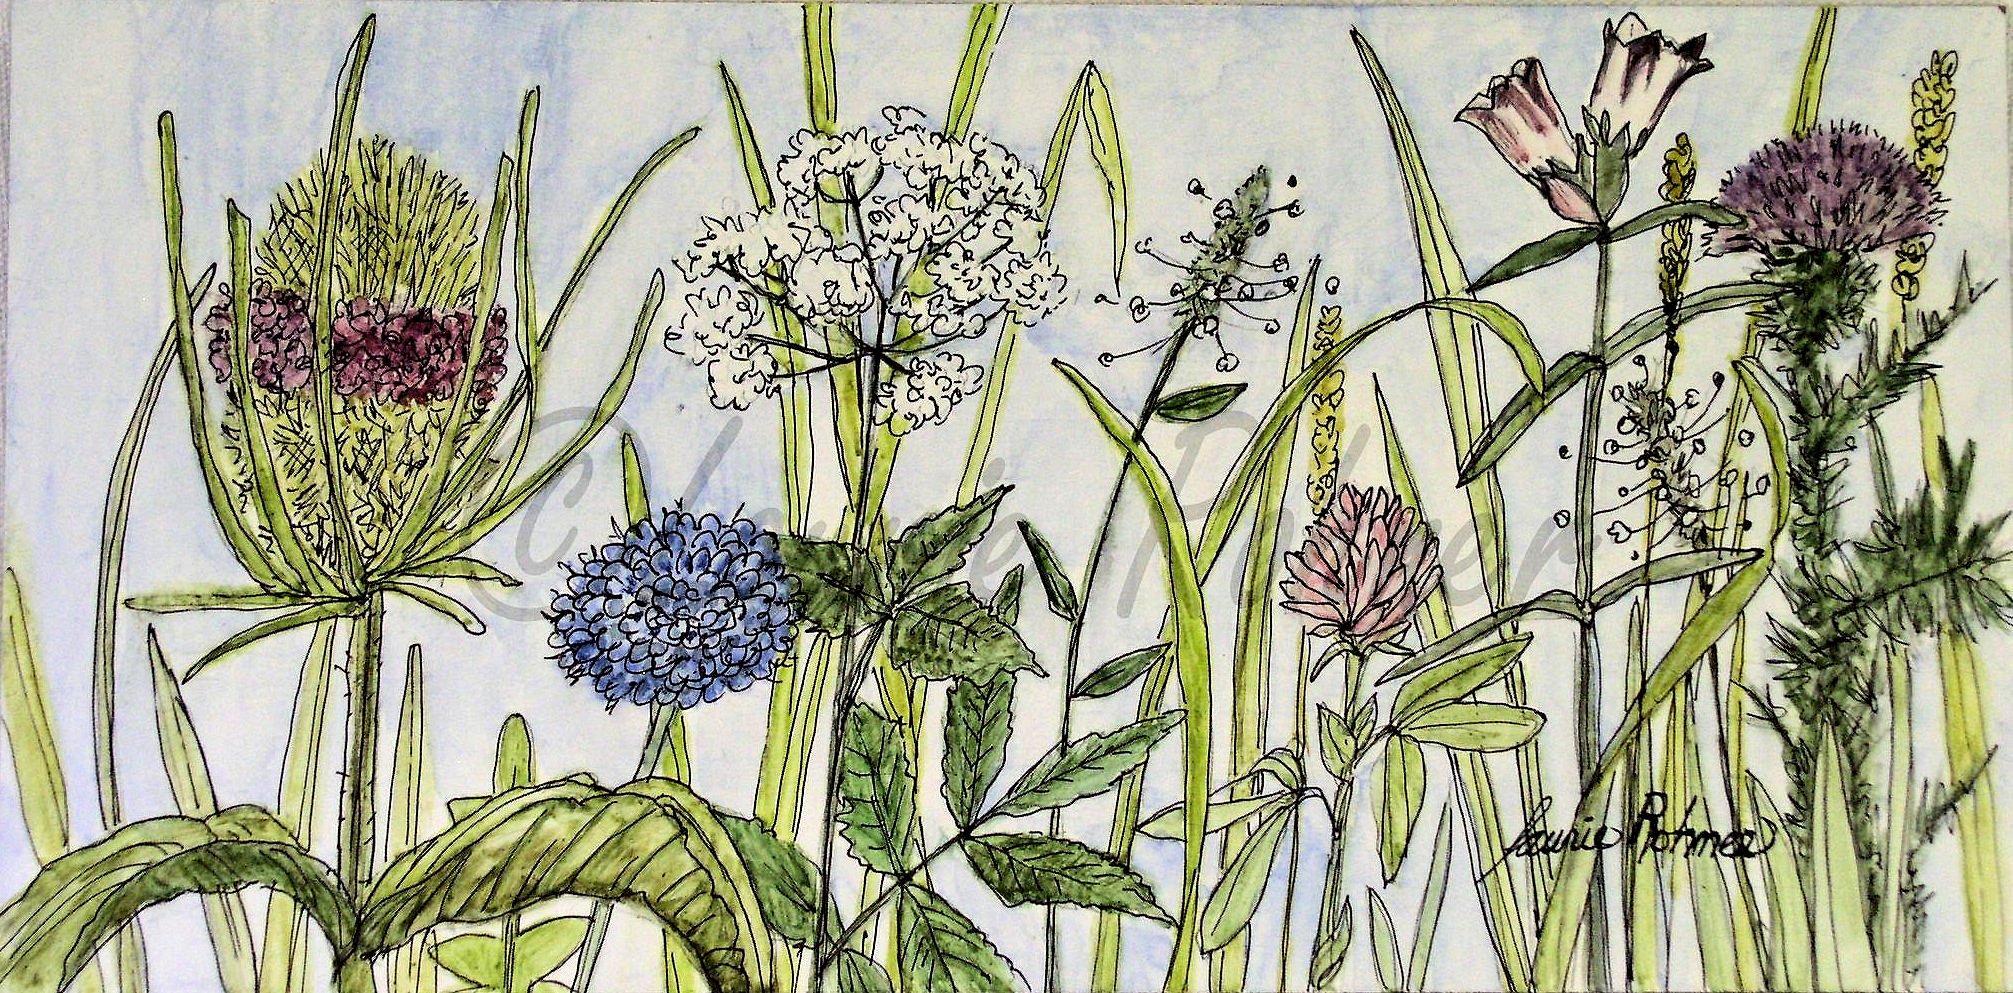 Herbs and flowers are illustrated in my watercolor painted on clay board.